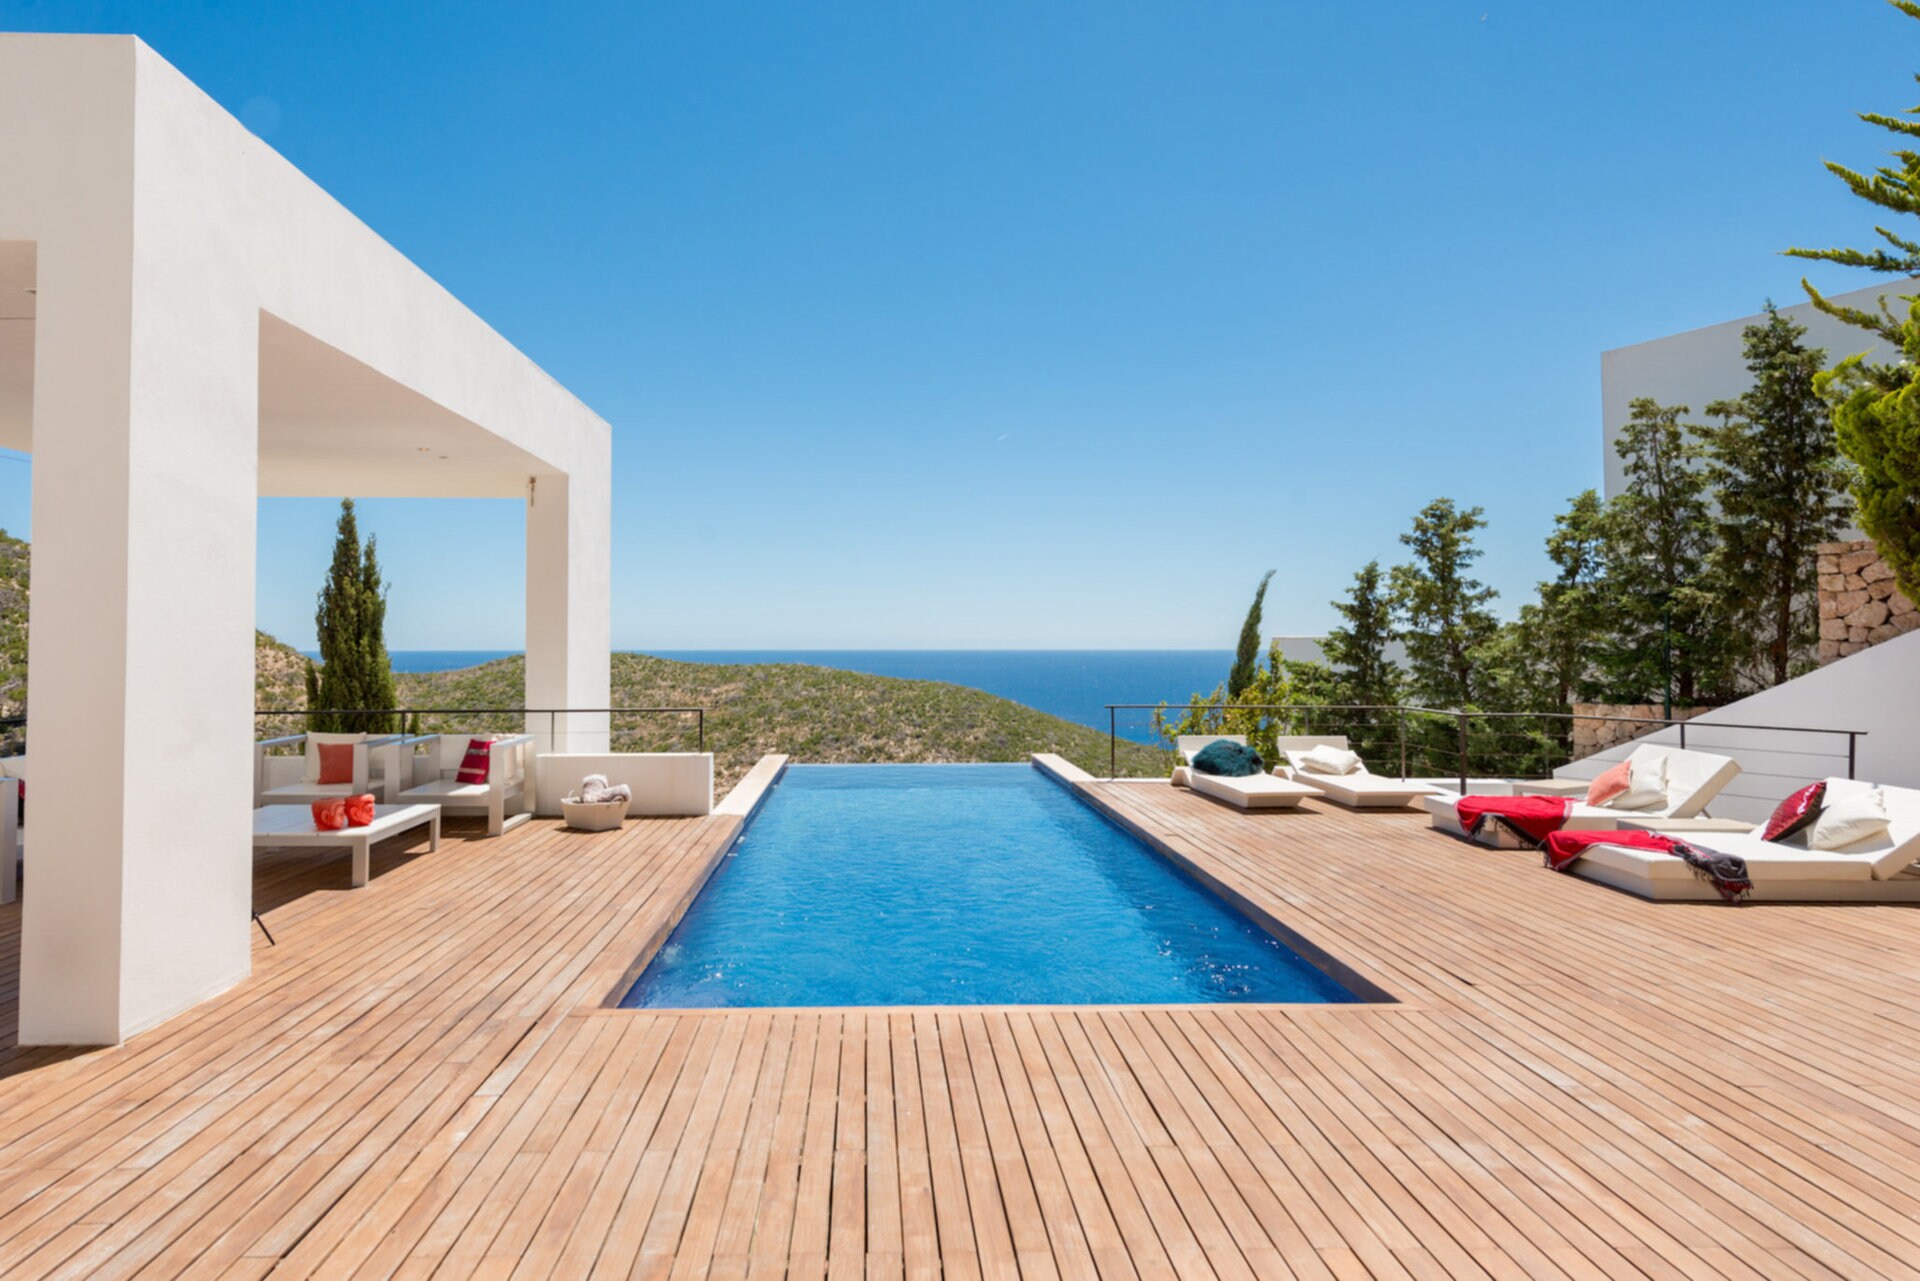 Property Image 2 - Rent this Luxury Villa with Private Pool, Ibiza Villa 1267